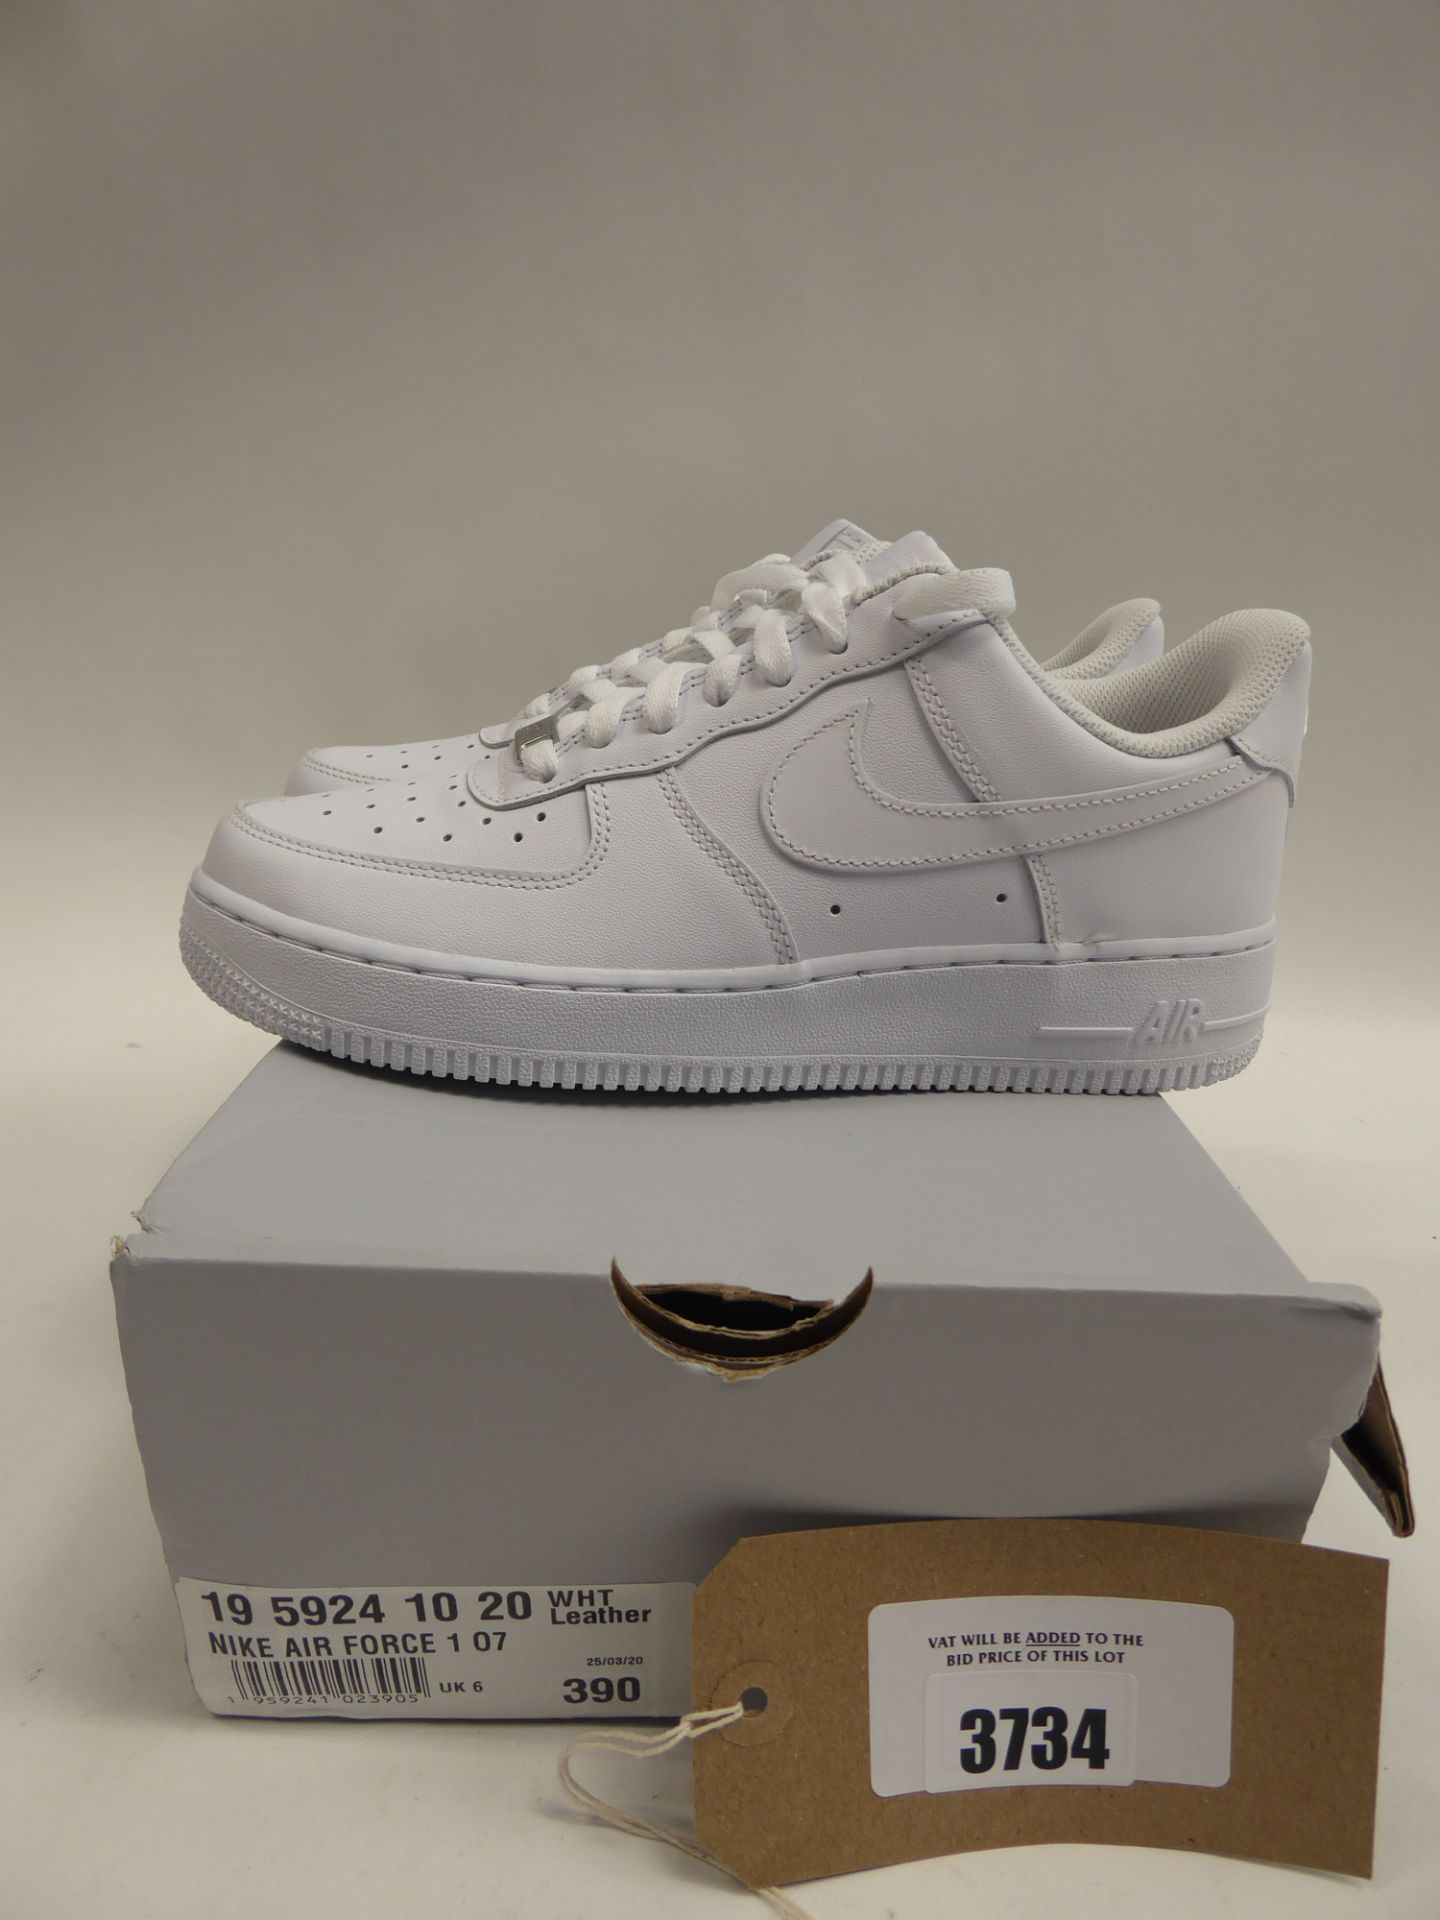 Nike Air Force 1 trainers size 6